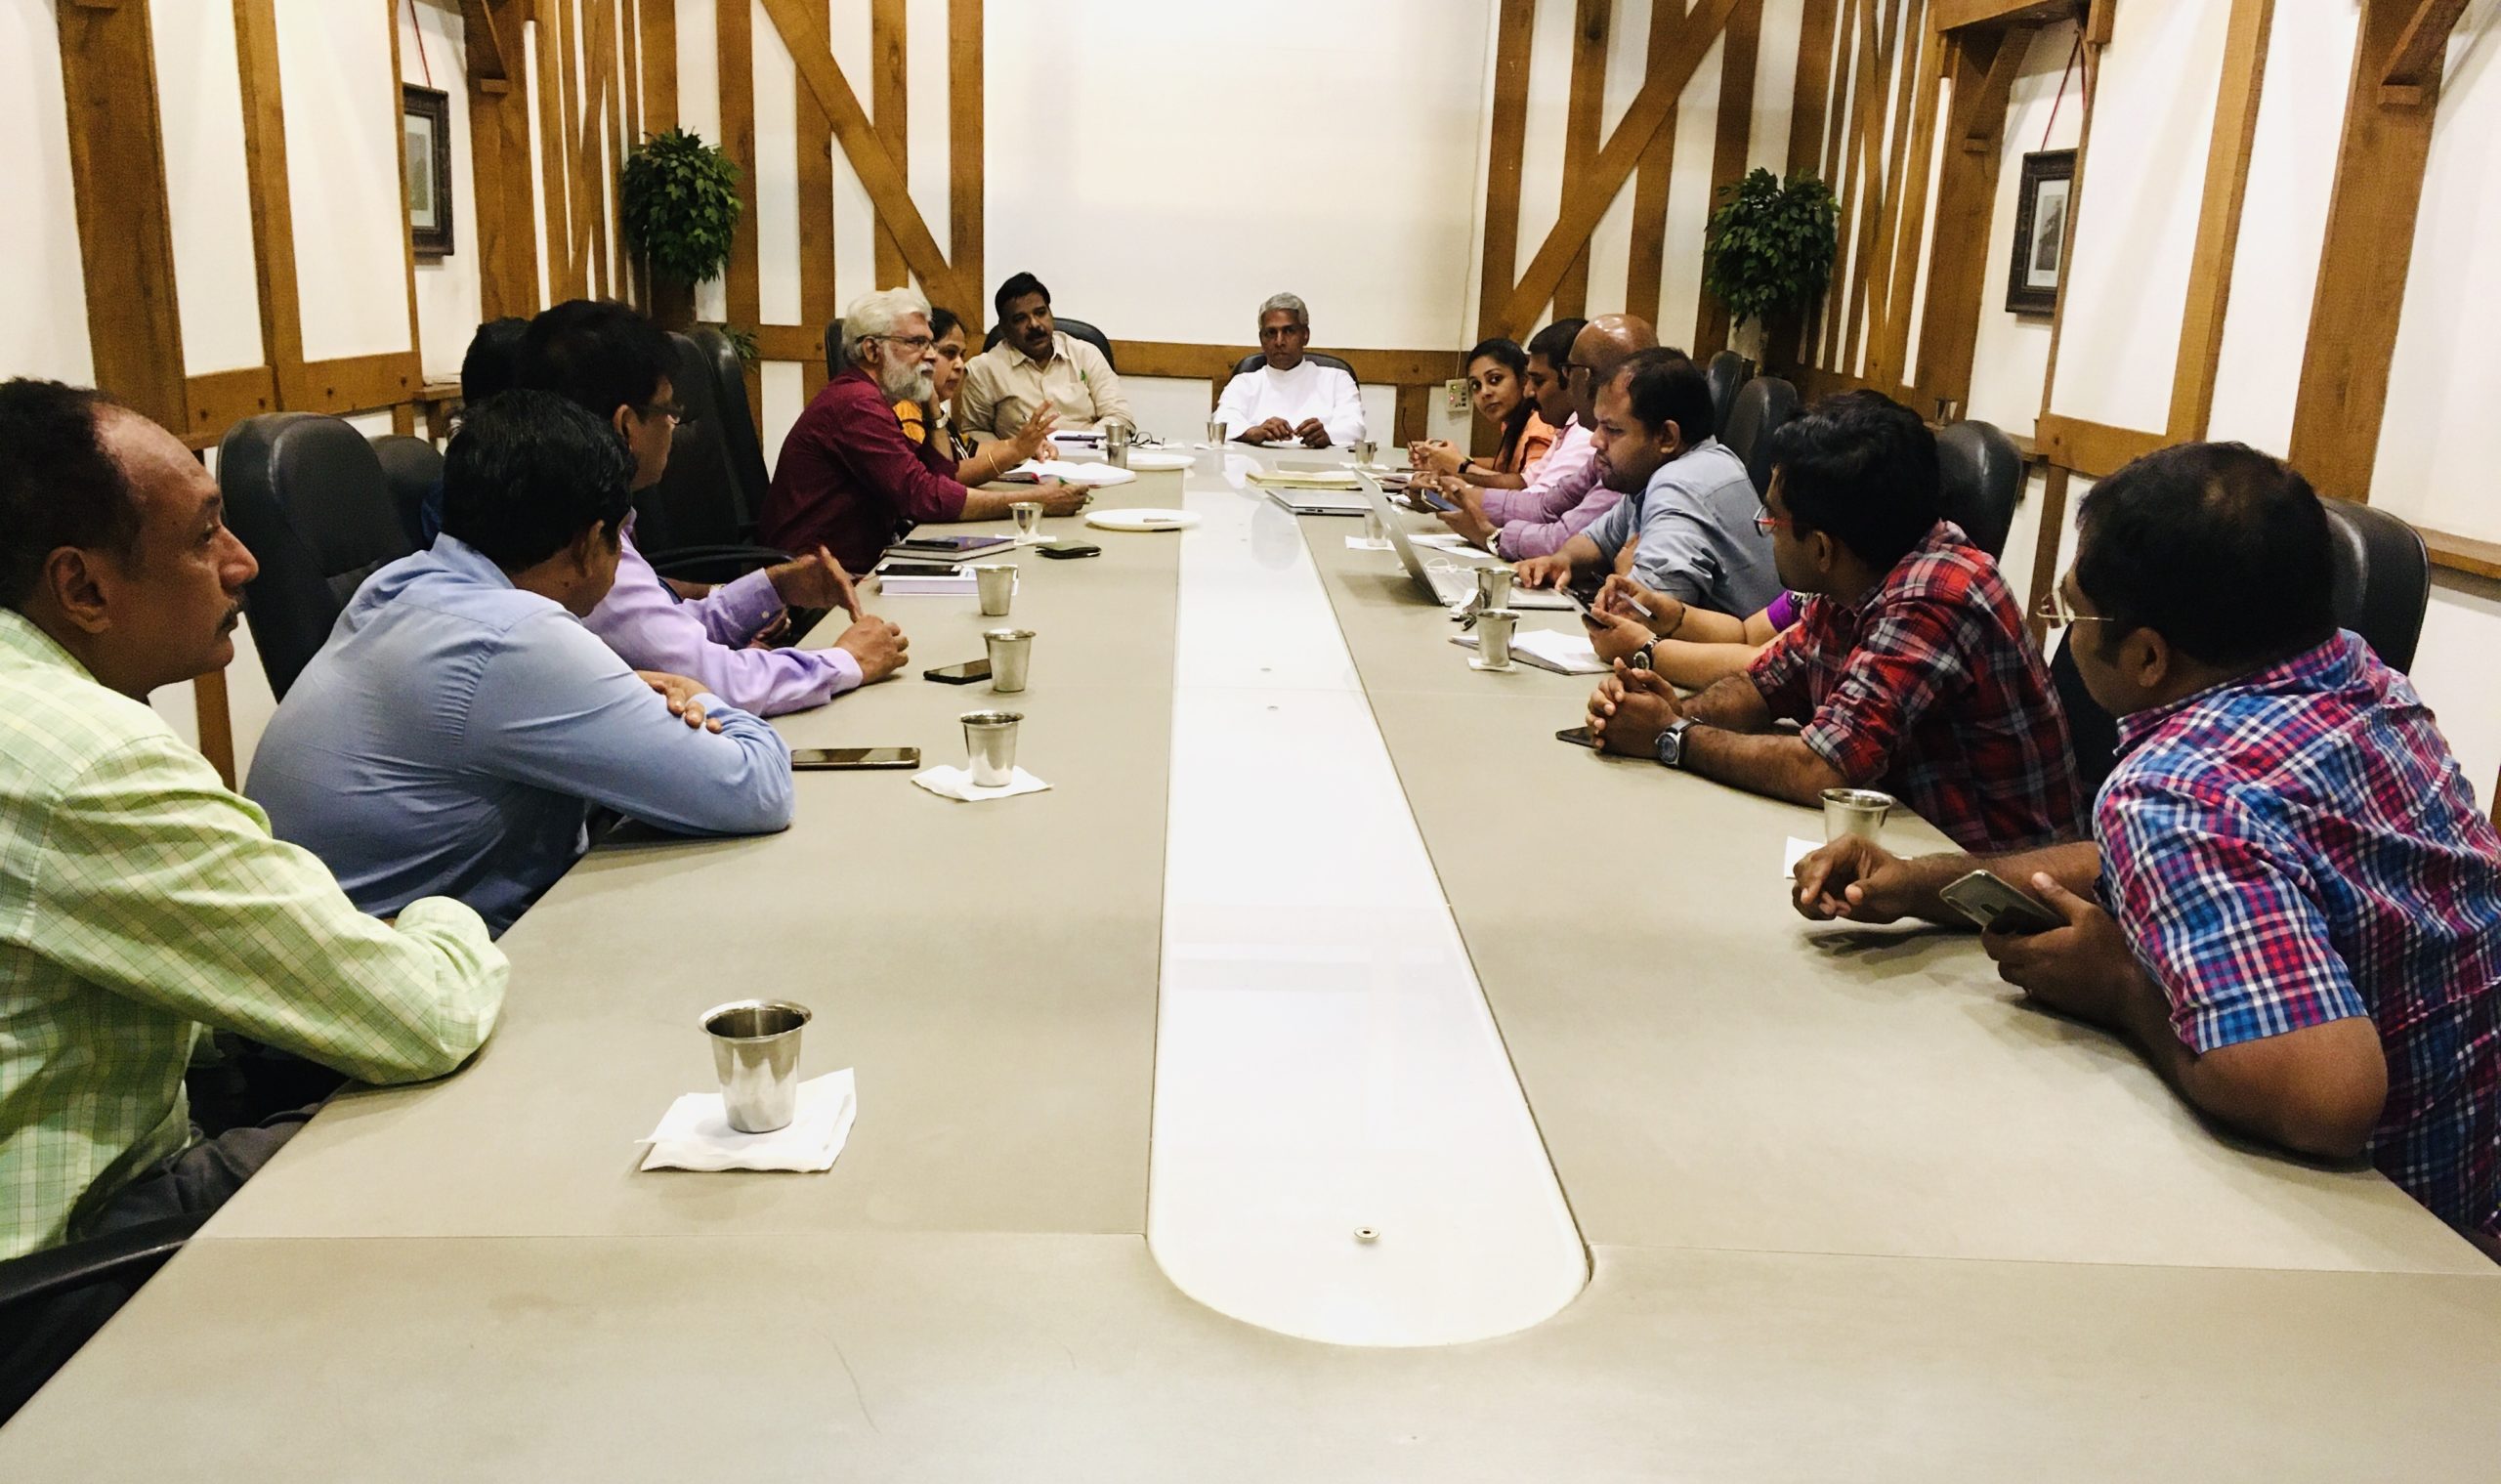 St. Albert’s College (Autonomous) Executive Committee Meeting held on I6/03/2020 chaired by Chairman Rev. Fr. Antony Arackal